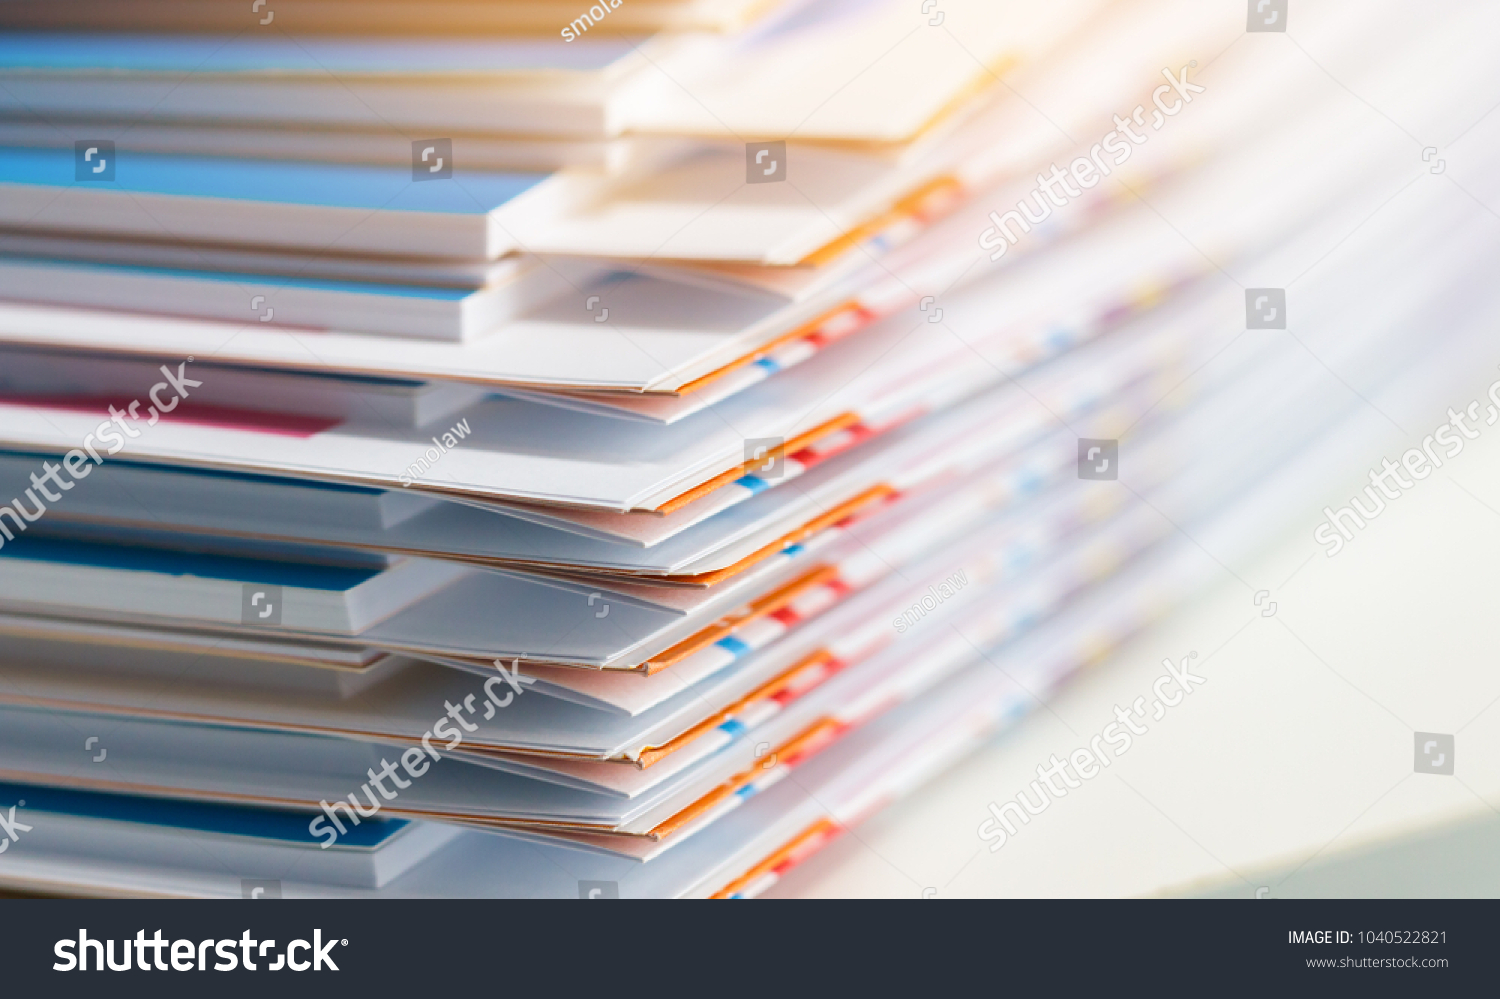 Stack of report paper documents for business desk, Business papers for Annual Reports files, Document is written,presented. Business offices concept, soft focus #1040522821